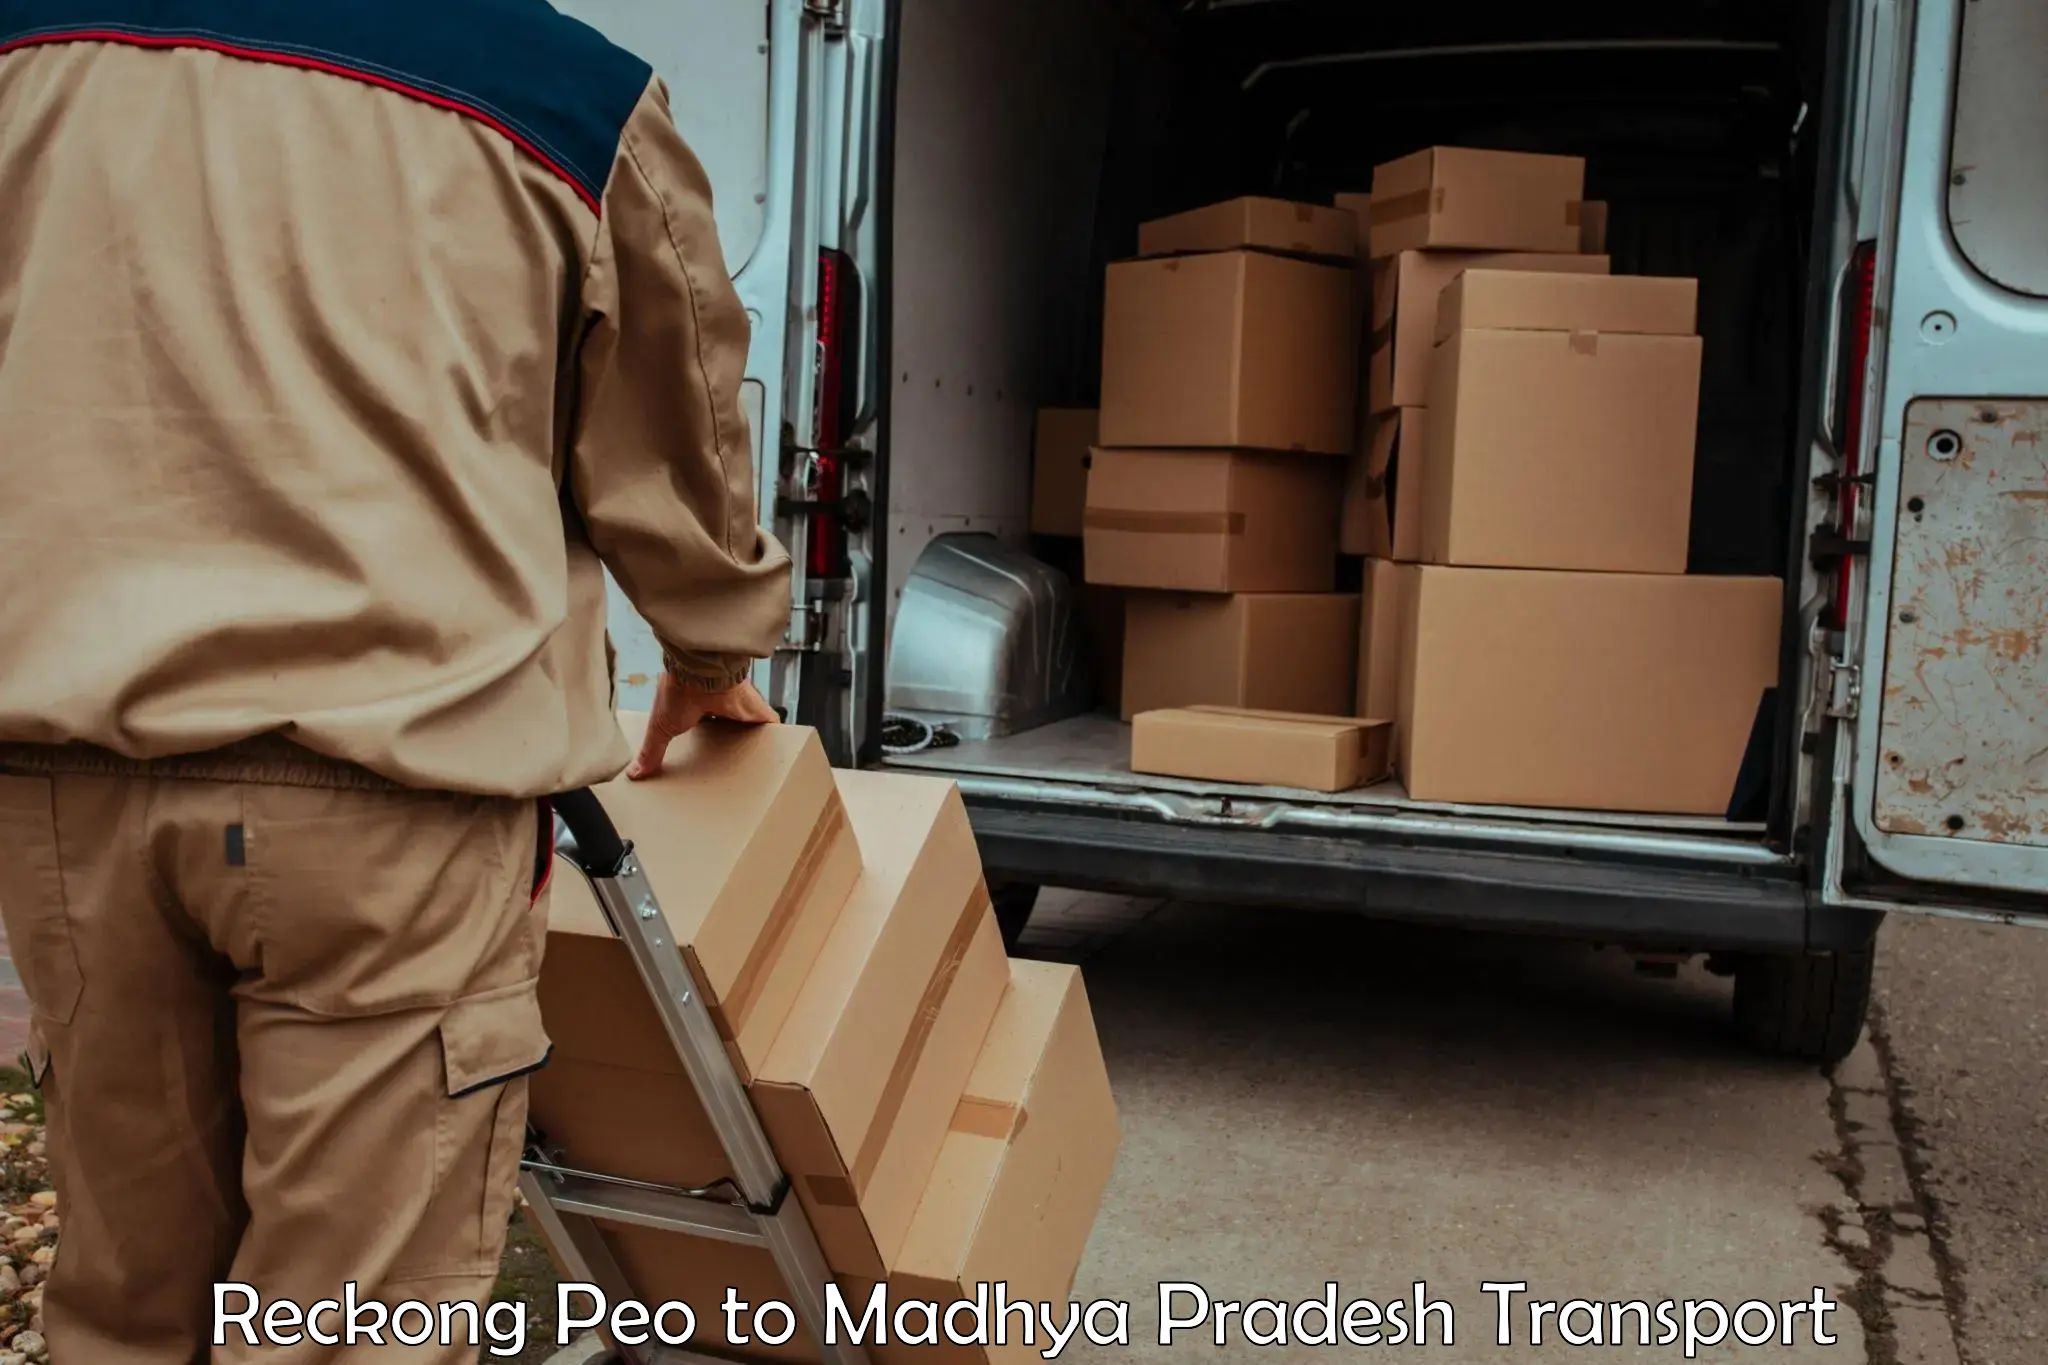 Part load transport service in India Reckong Peo to Sardarpur